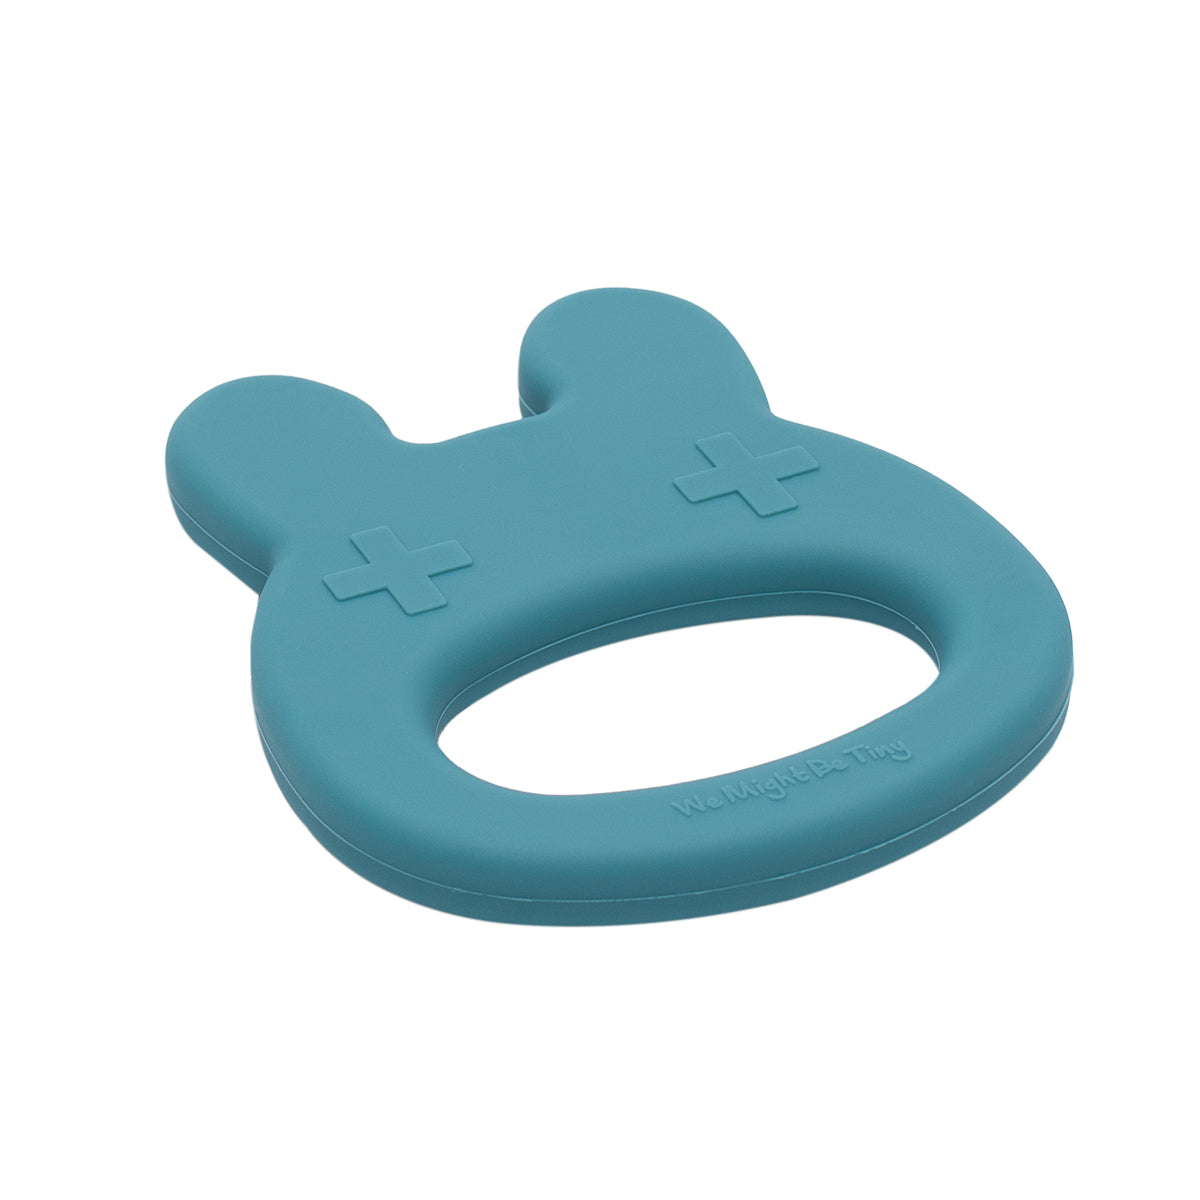 Our silicone bunny teething ring in Blue Dusk